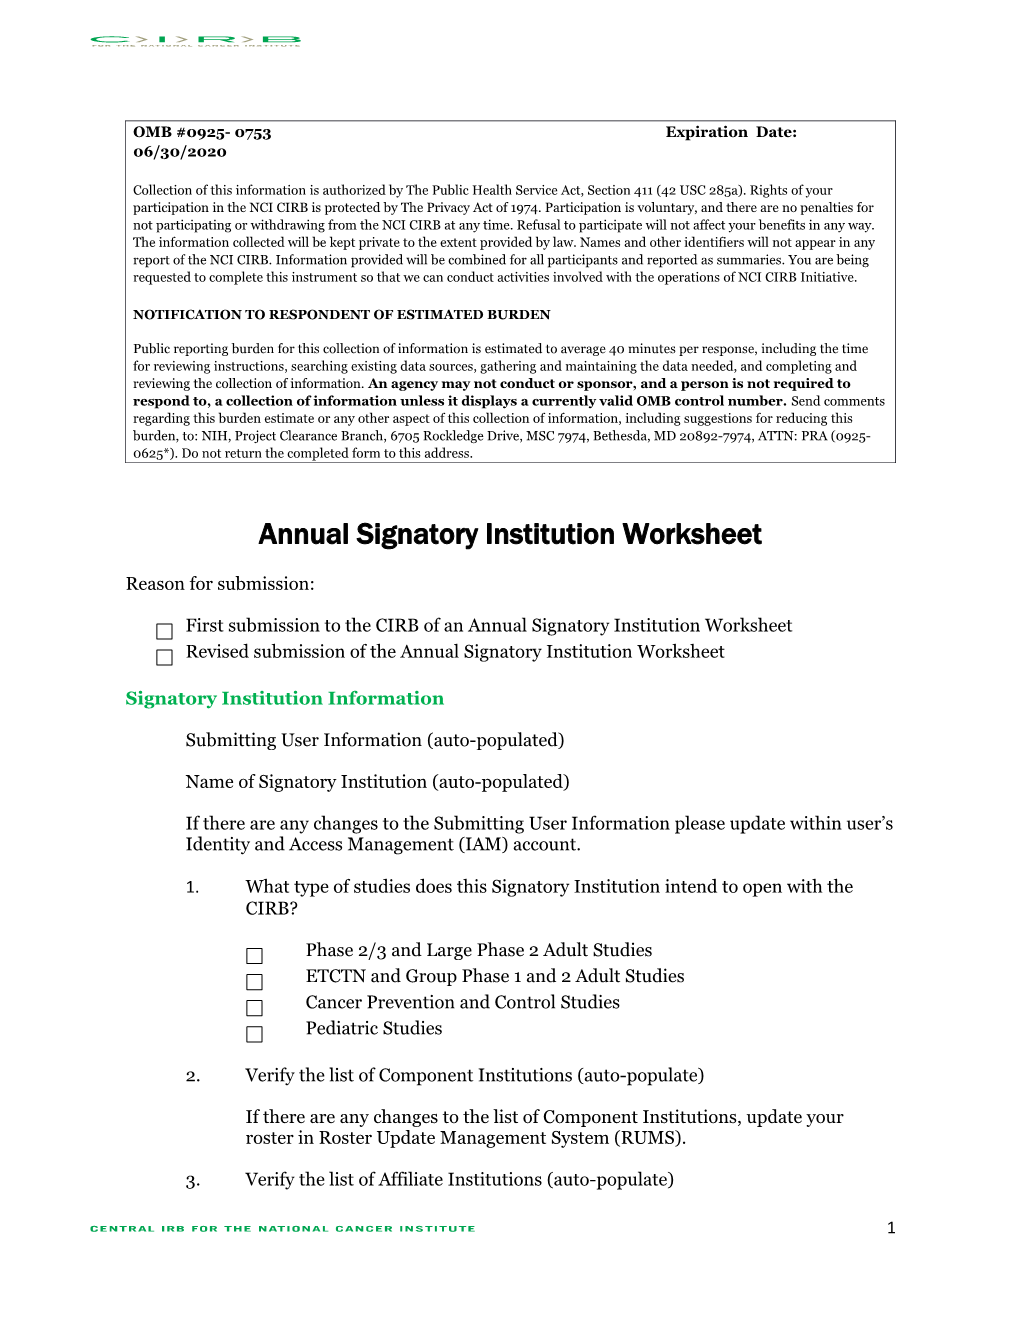 CIRB Annual Institution Worksheet About Local Context